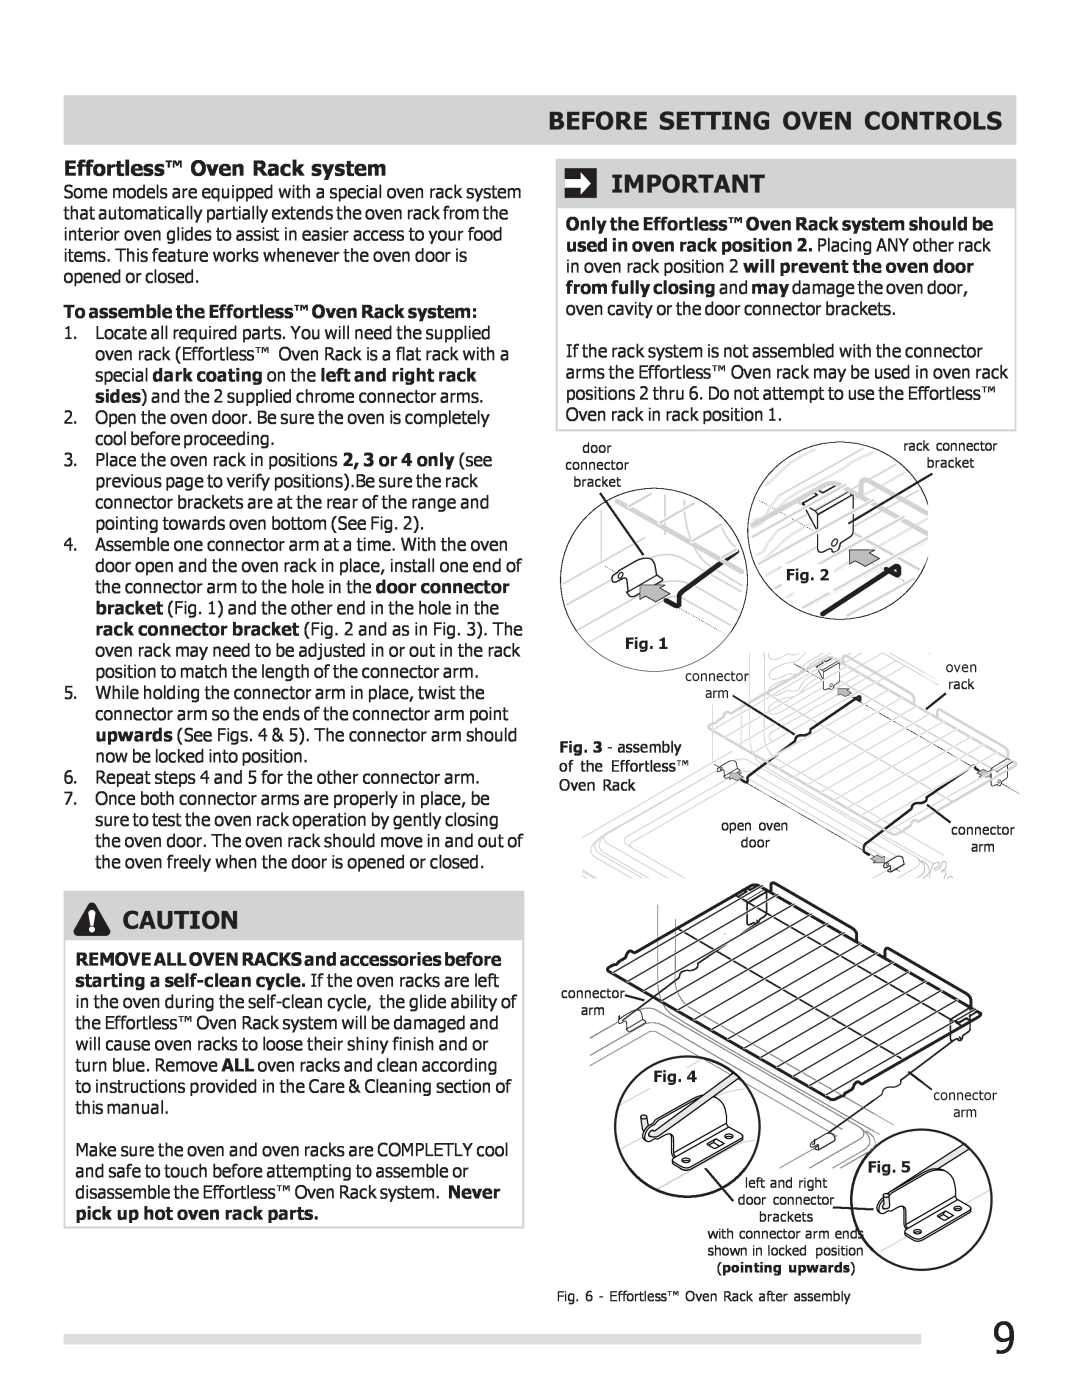 Frigidaire CGGF3054KF, 316901300 important safety instructions Effortless Oven Rack system, Before Setting Oven Controls 